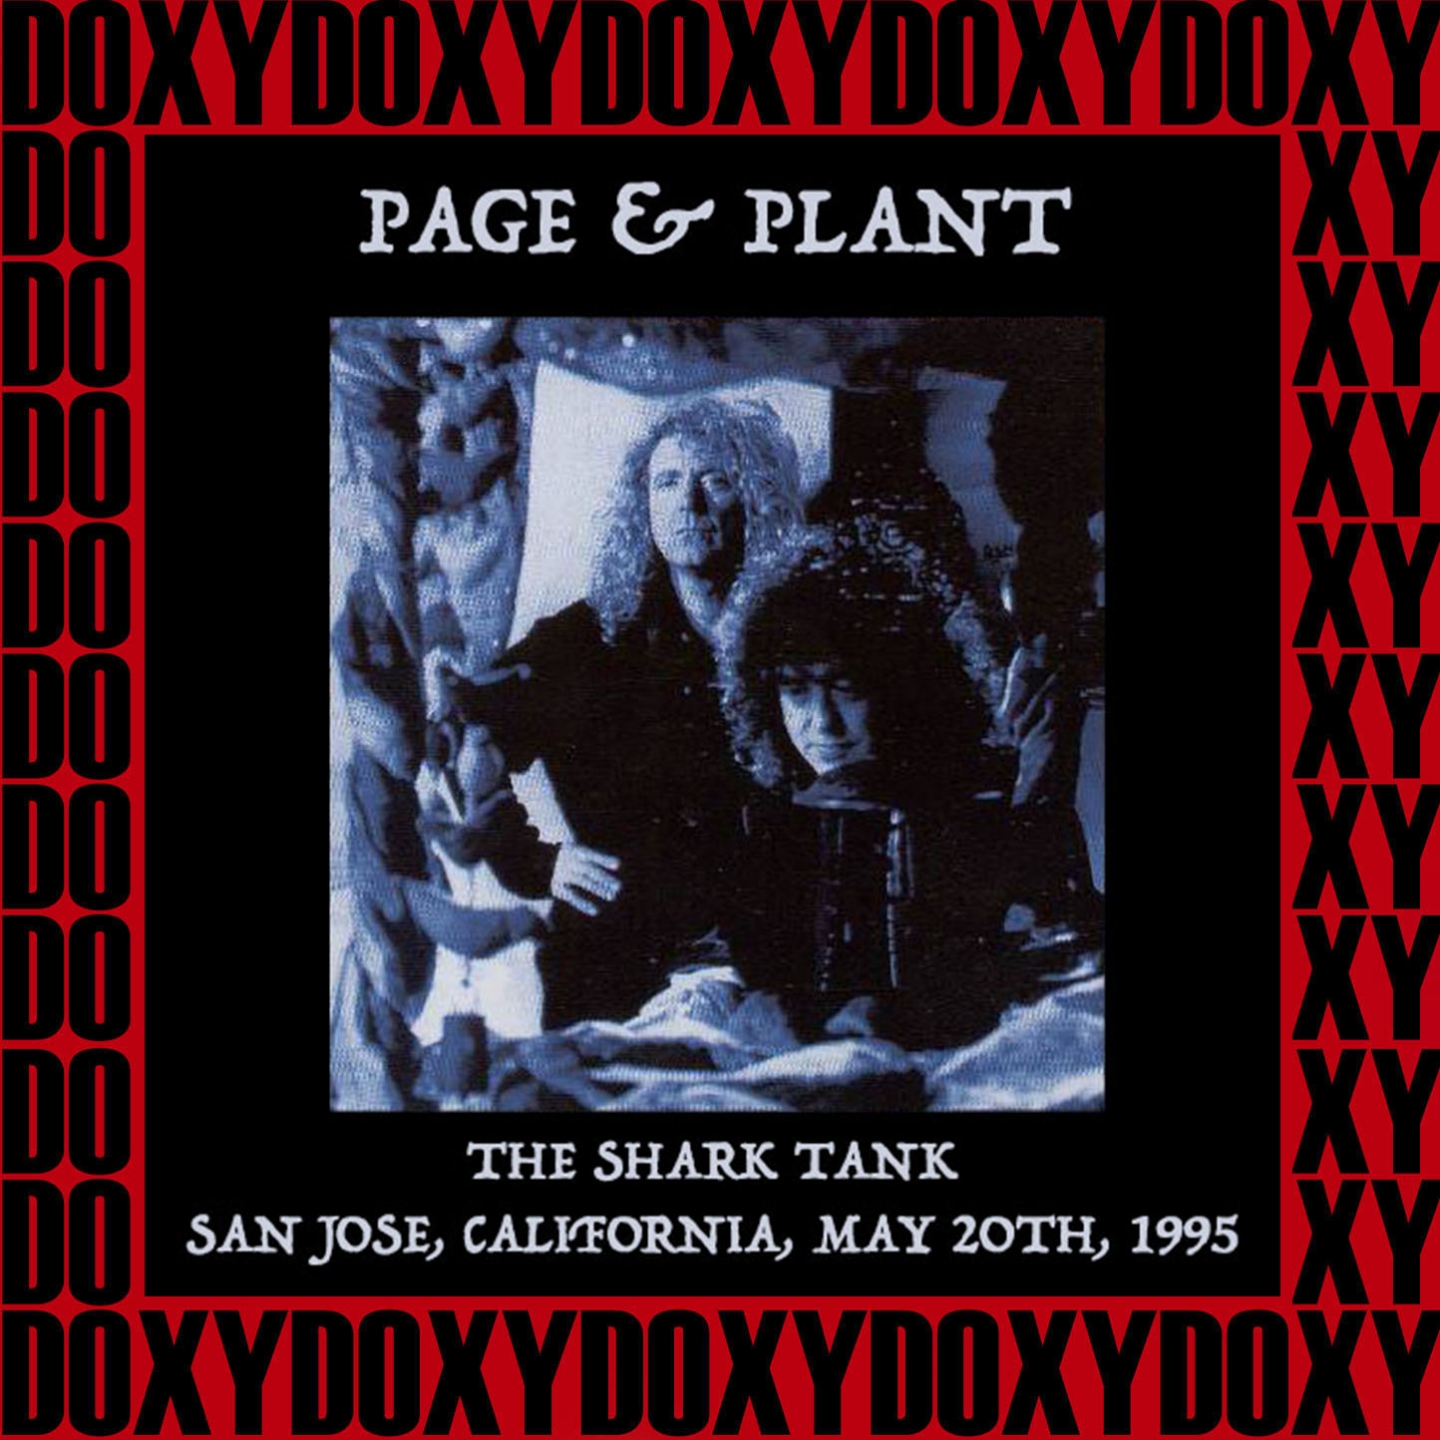 The Shark Tank, San Jose, California, May 20th, 1995 (Doxy Collection, Remastered, Live on Fm Broadcasting)